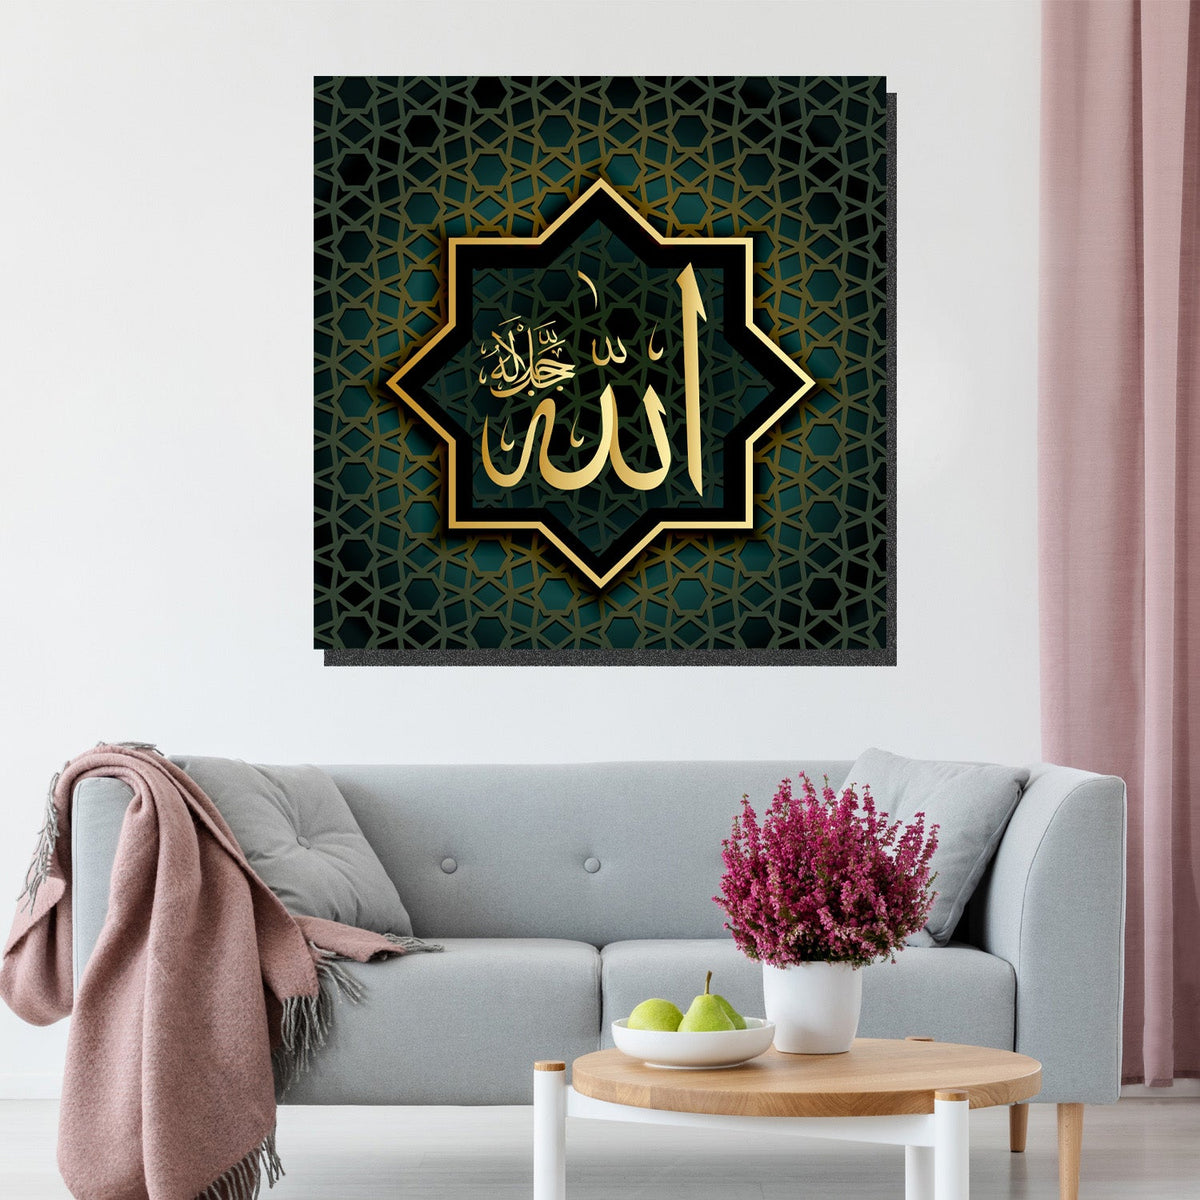 https://cdn.shopify.com/s/files/1/0387/9986/8044/products/IslamicArtLimitedEdition13CanvasArtprintStretched-3.jpg